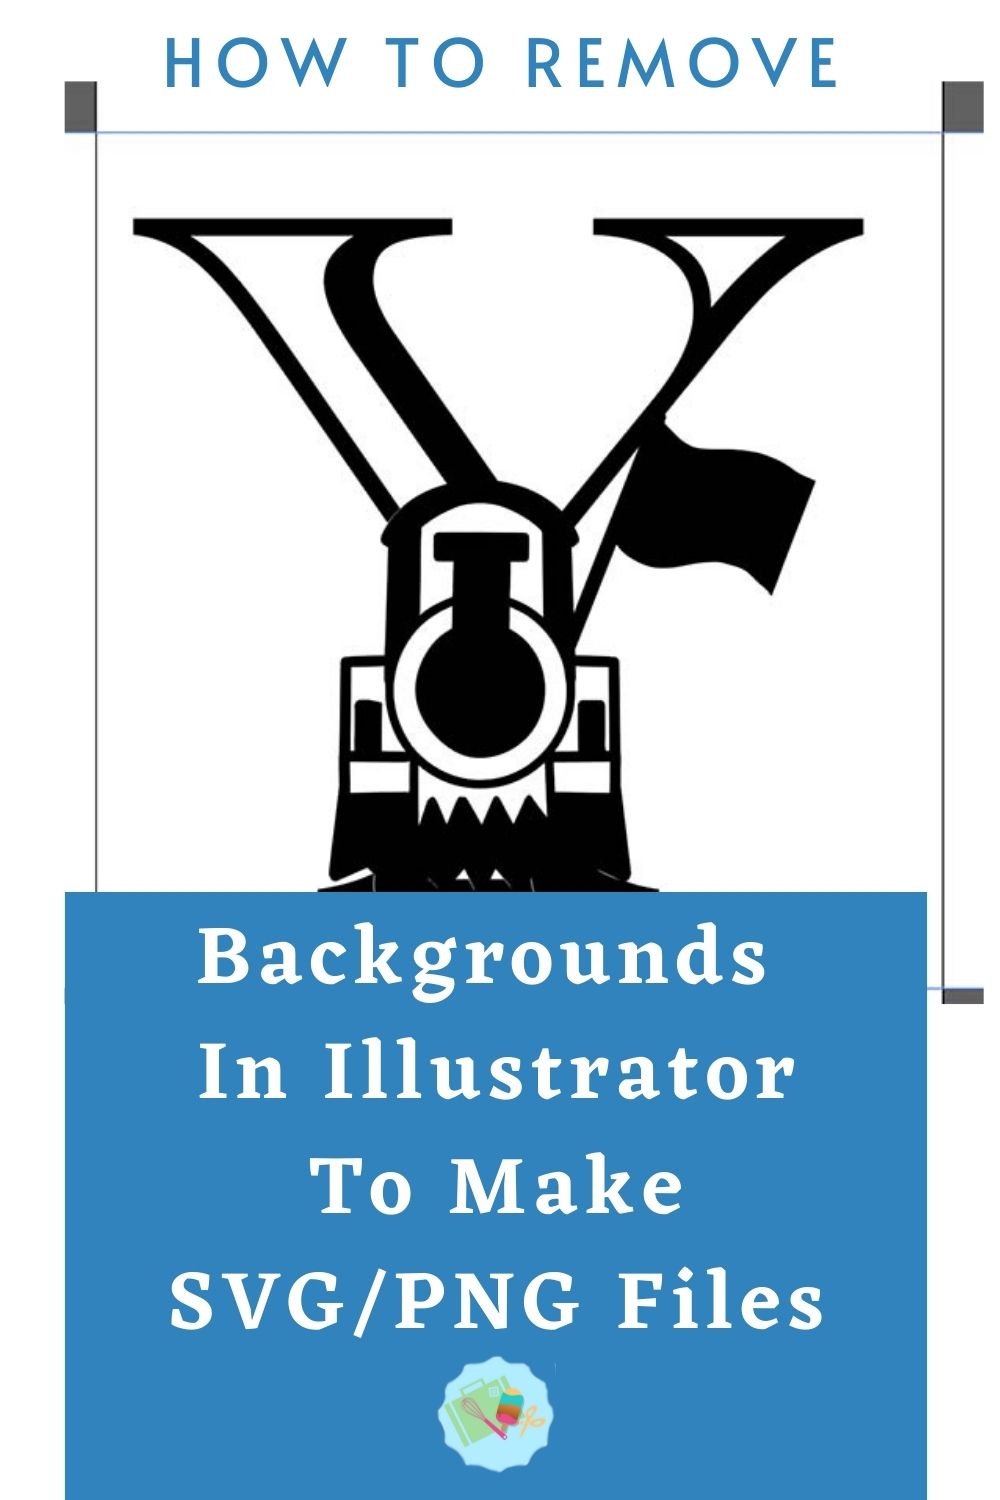 How to remove backgrounds in Illustrator to make SVG and PNG files for Cricut